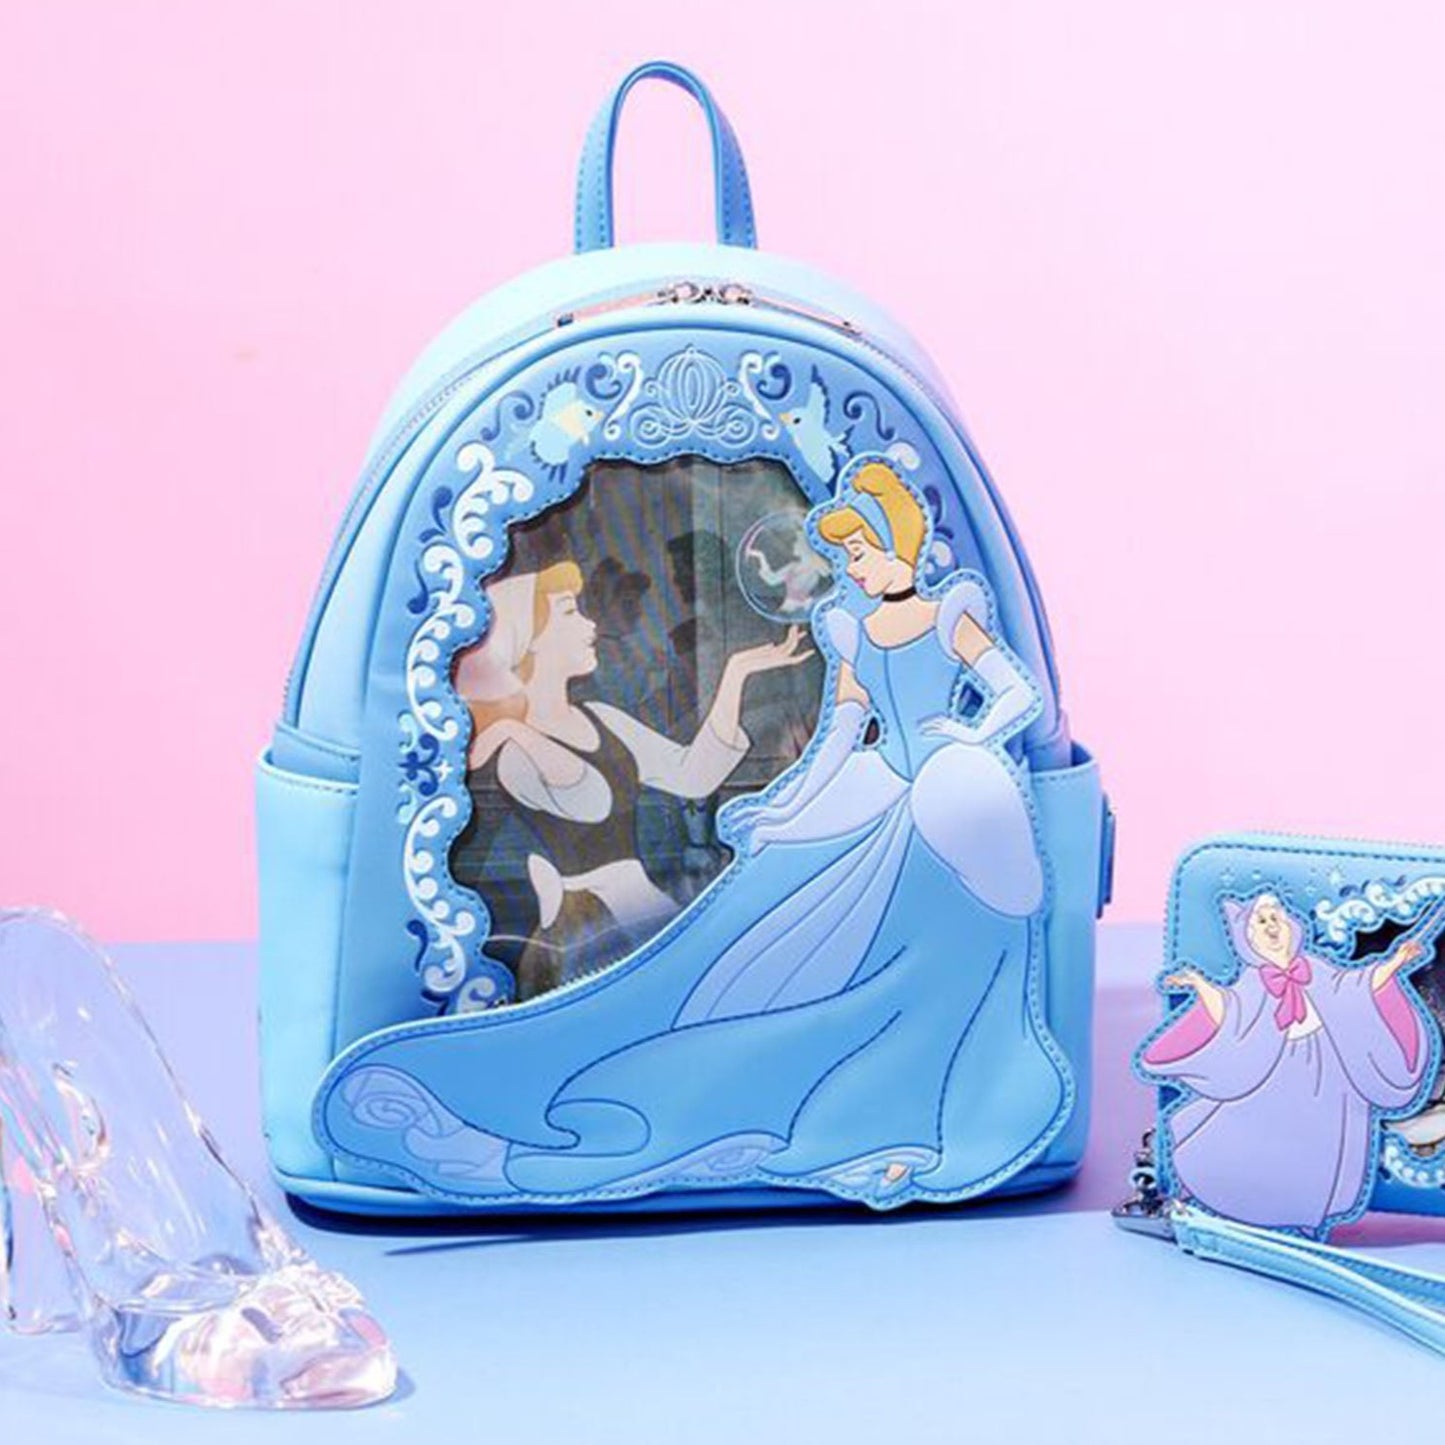 Cinderella (Disney) Lenticular Princess Series Mini Backpack by Loungefly